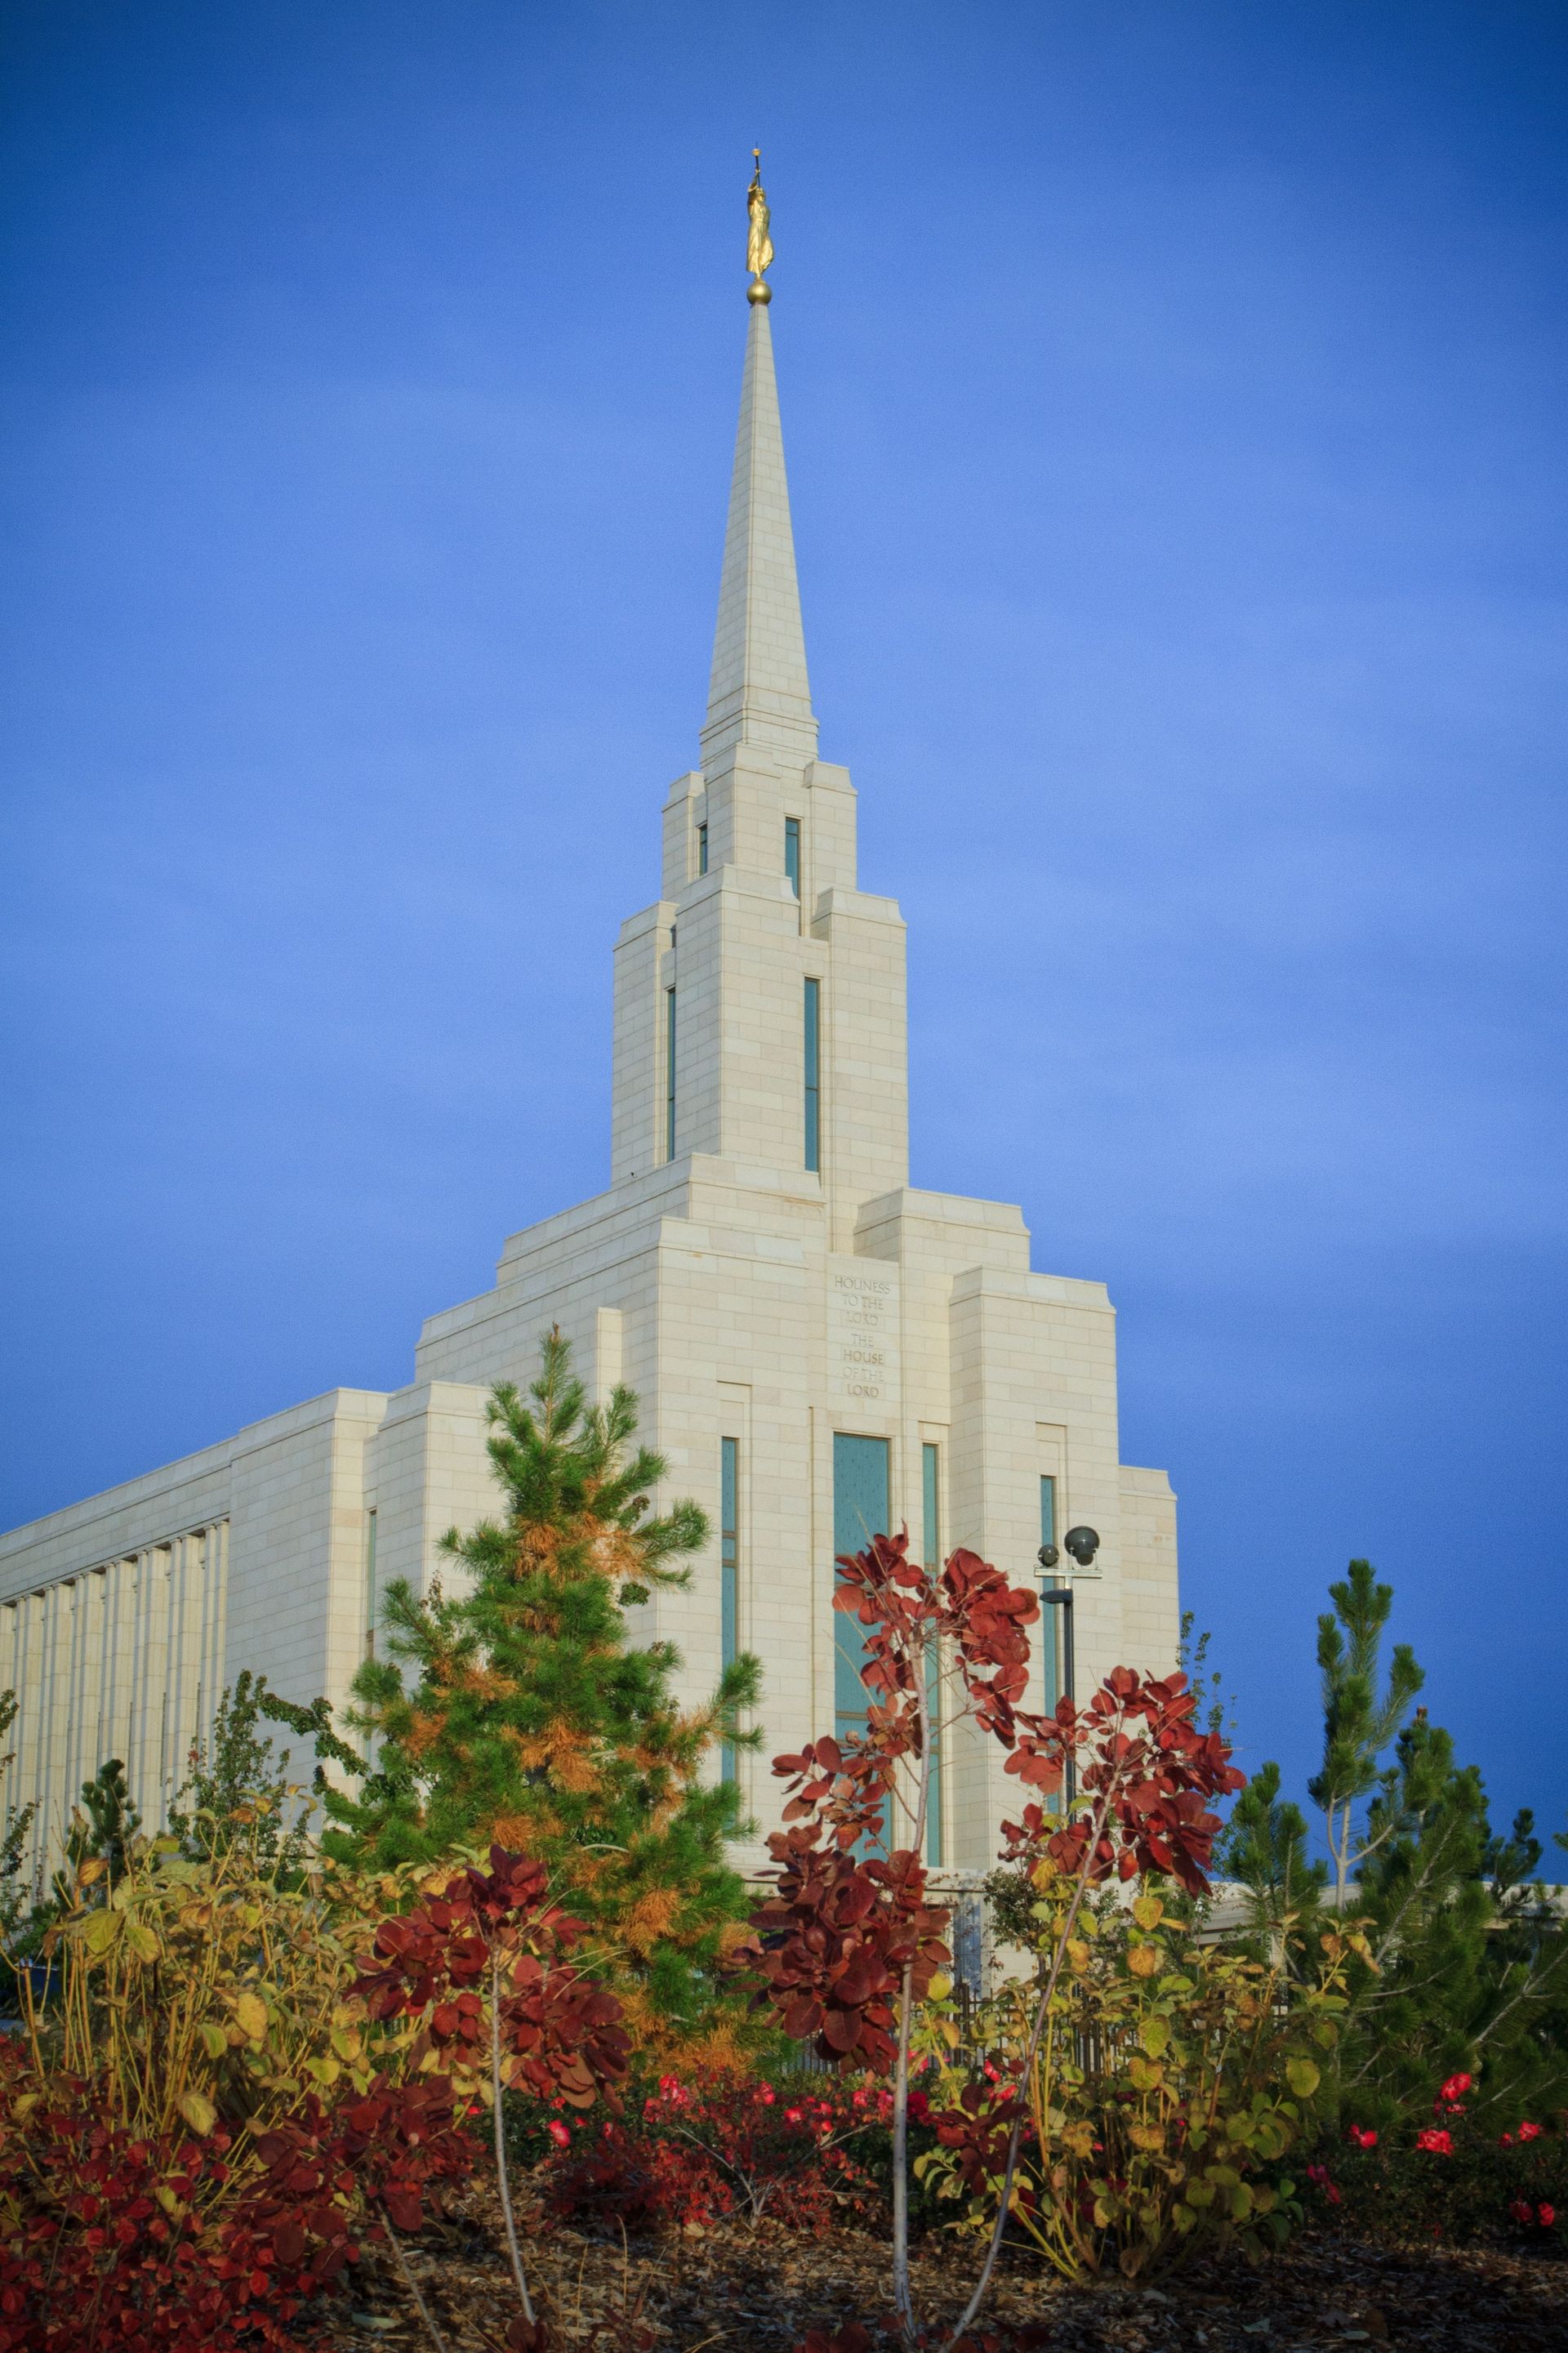 The Oquirrh Mountain Utah Temple in the fall, including scenery.